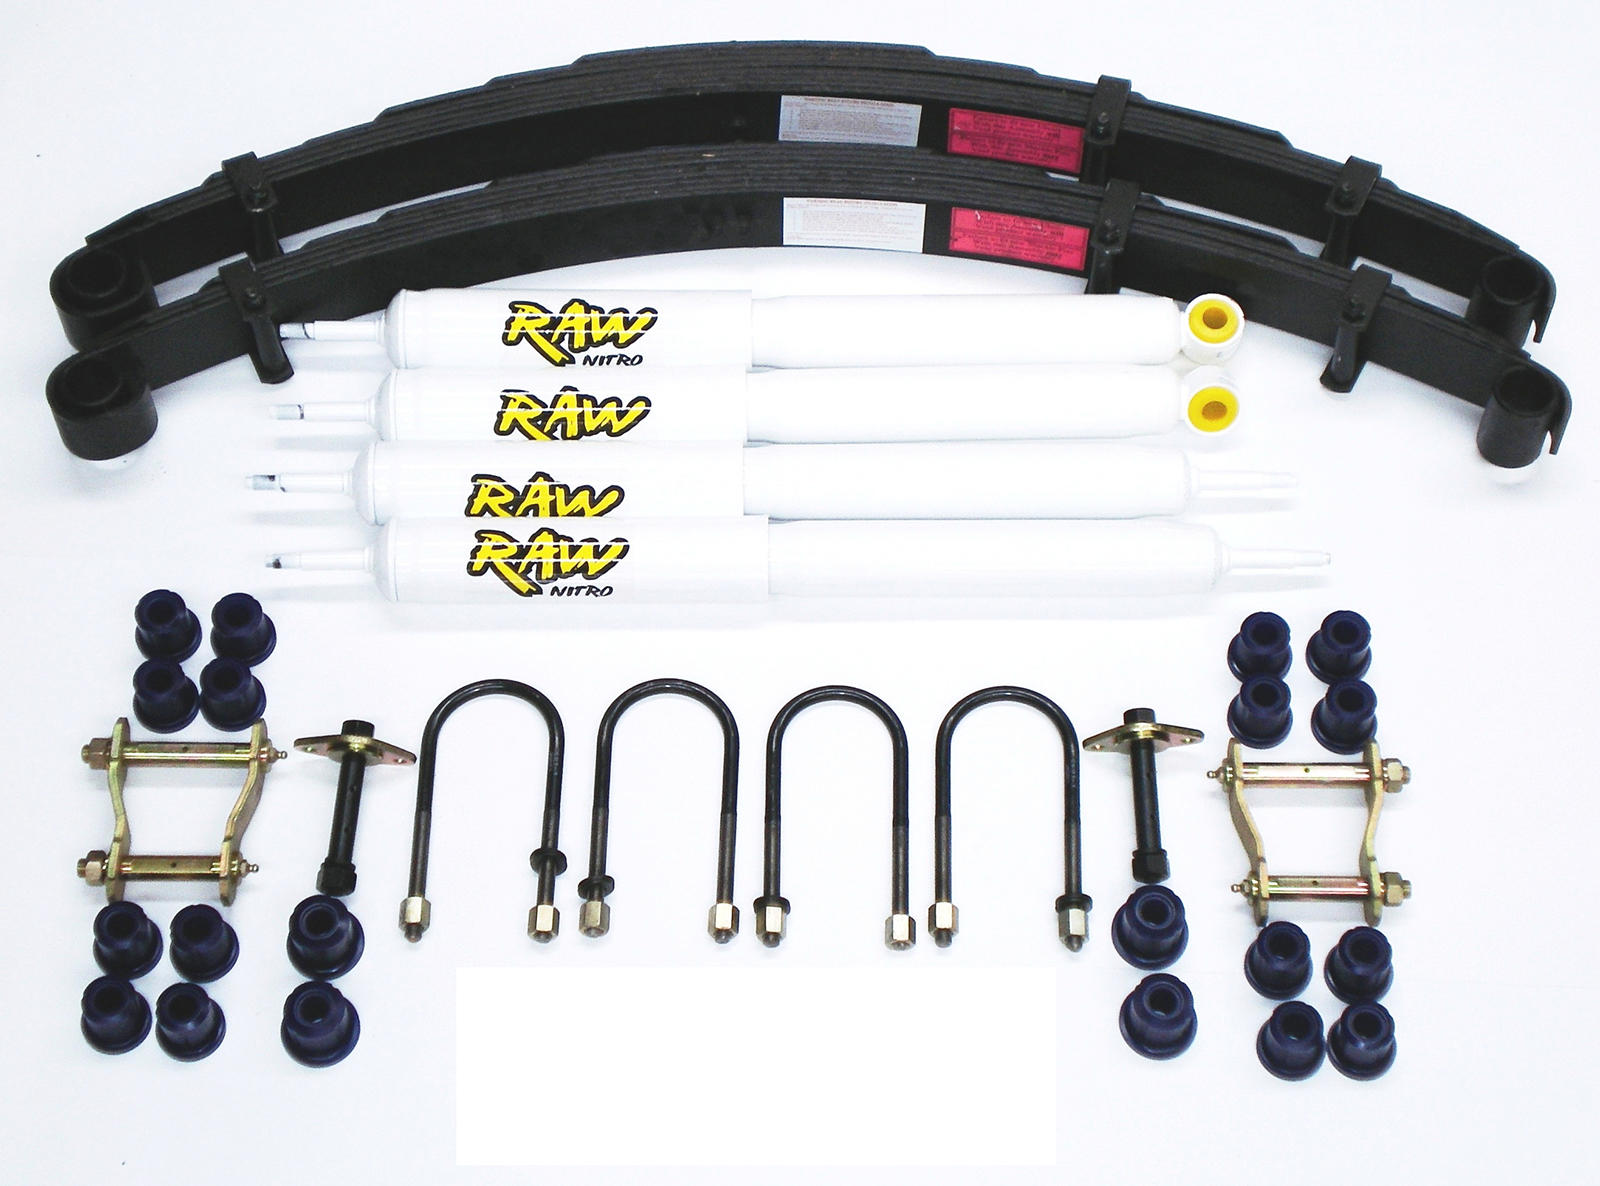 40mm RAW Nitro 4x4 Lift Kit Holden Colorado, Dmax, Rodeo & Great Wall